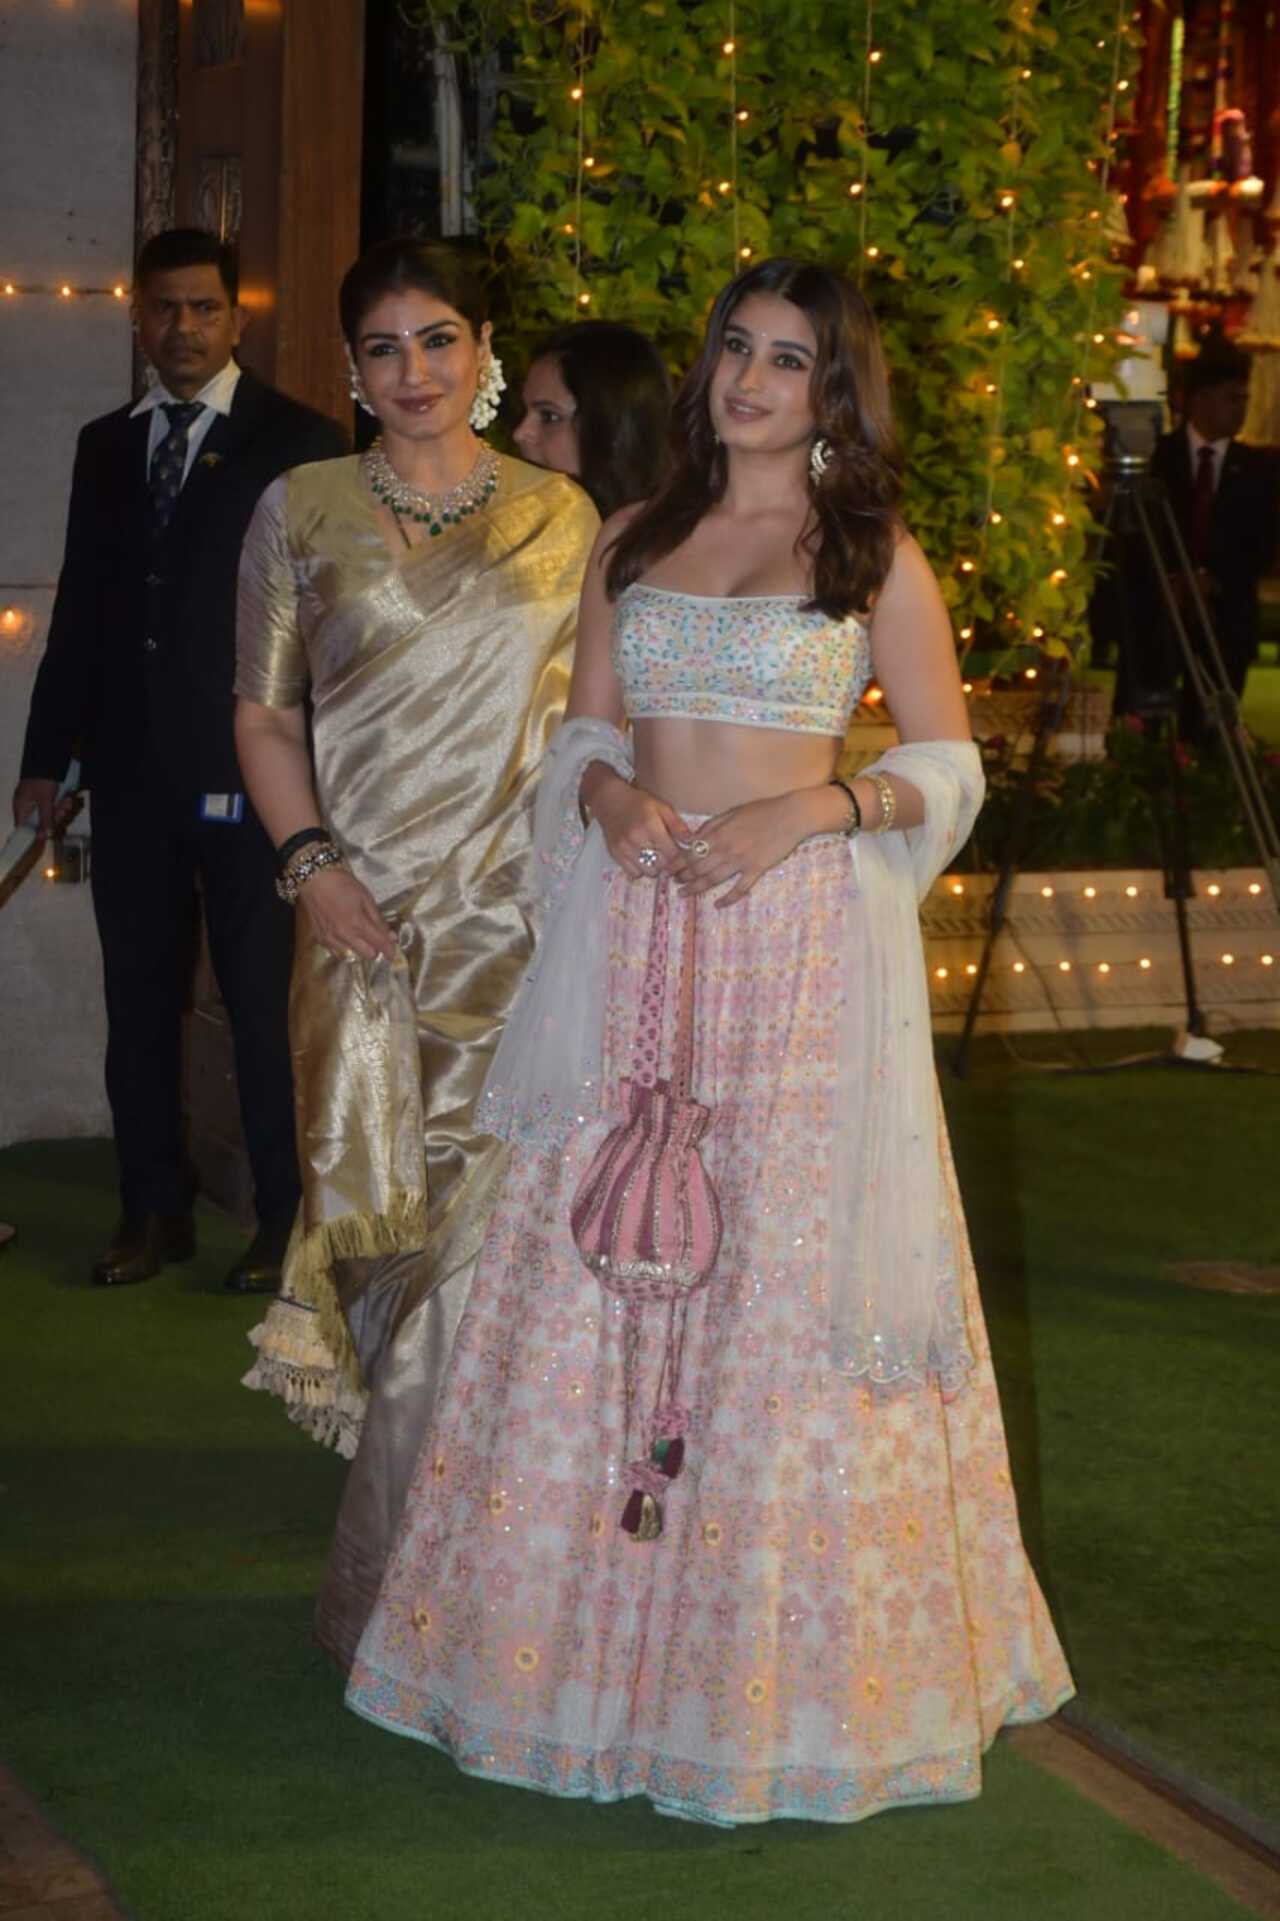 Raveena Tandon attended the Ganesh Puja with her daughter Rasha Thadani. The mother-daughter duo made heads turn